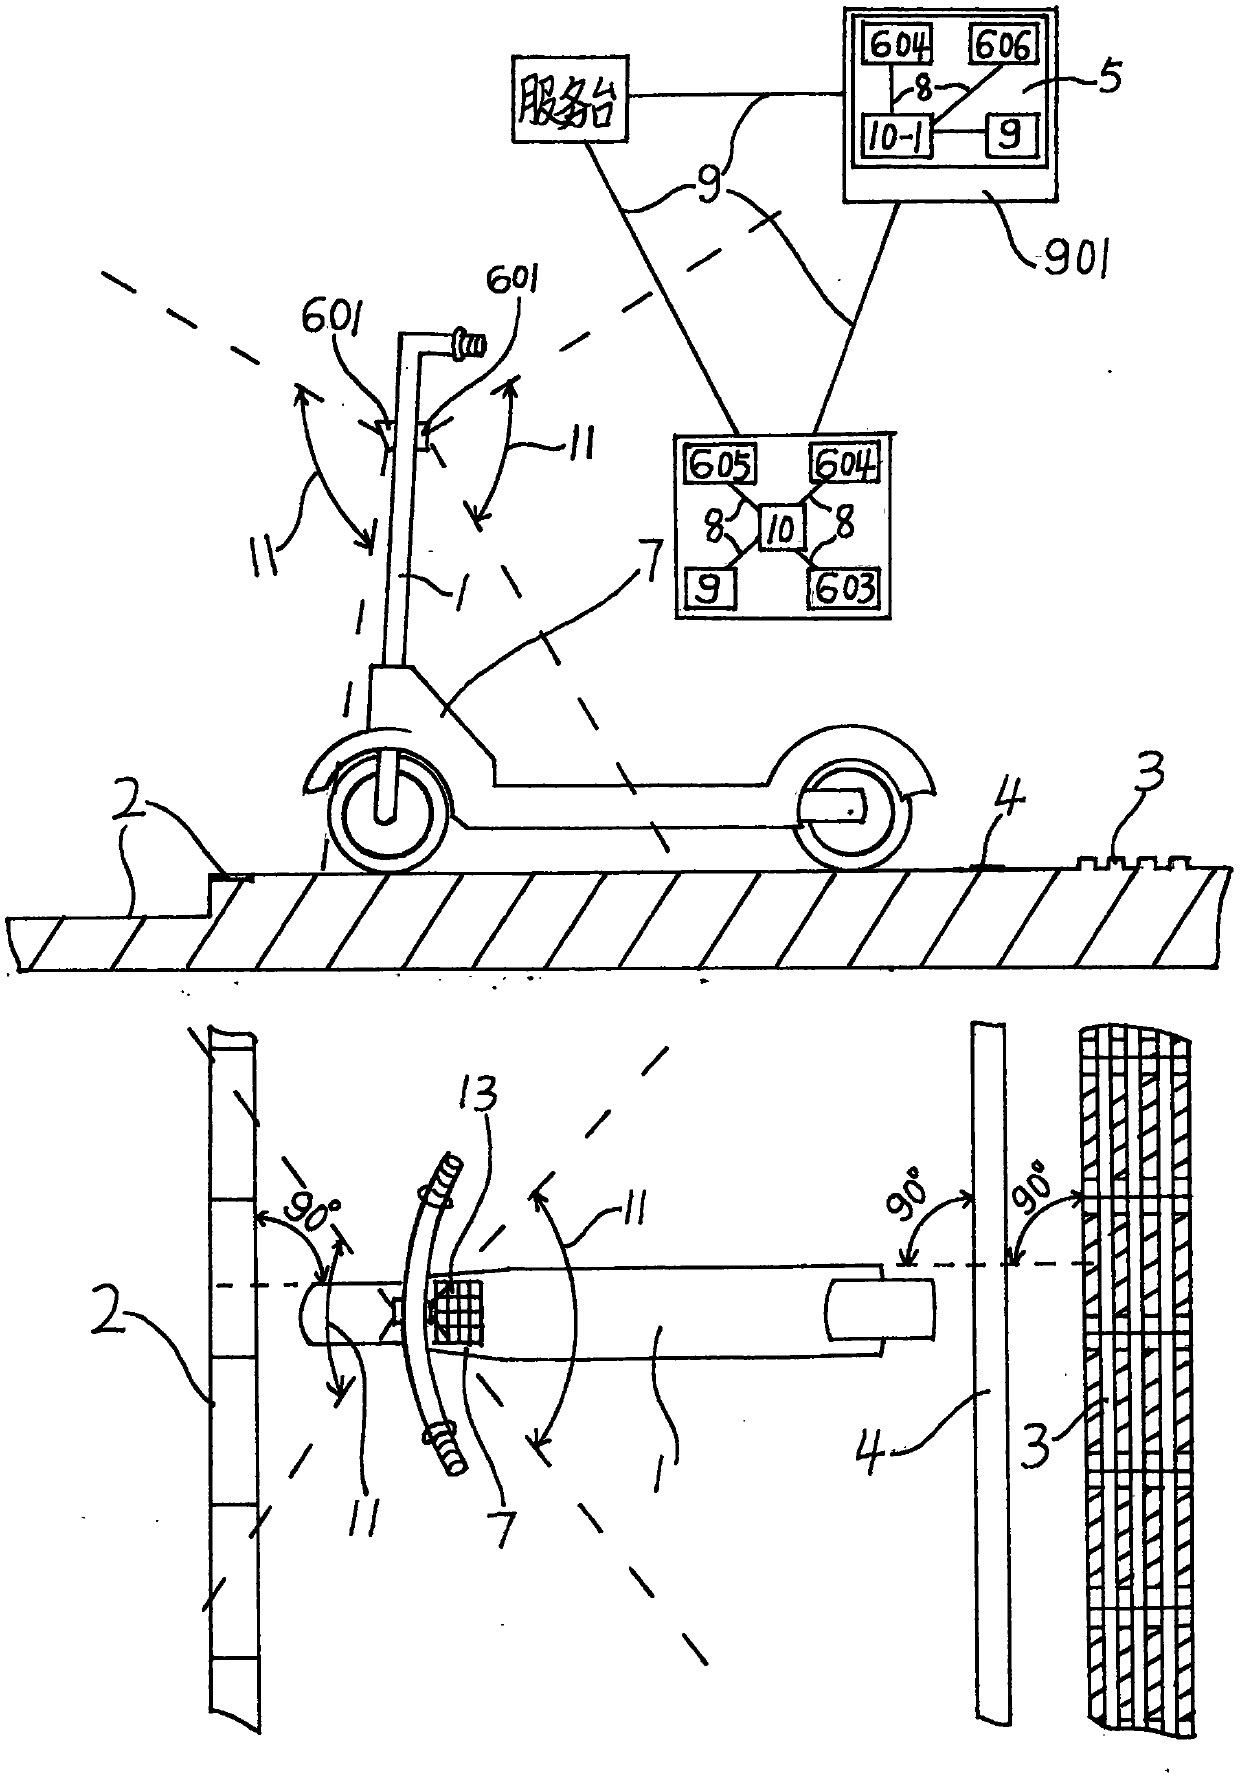 System and method for identifying whether angle and distance between vehicle orientation and road are correct or not